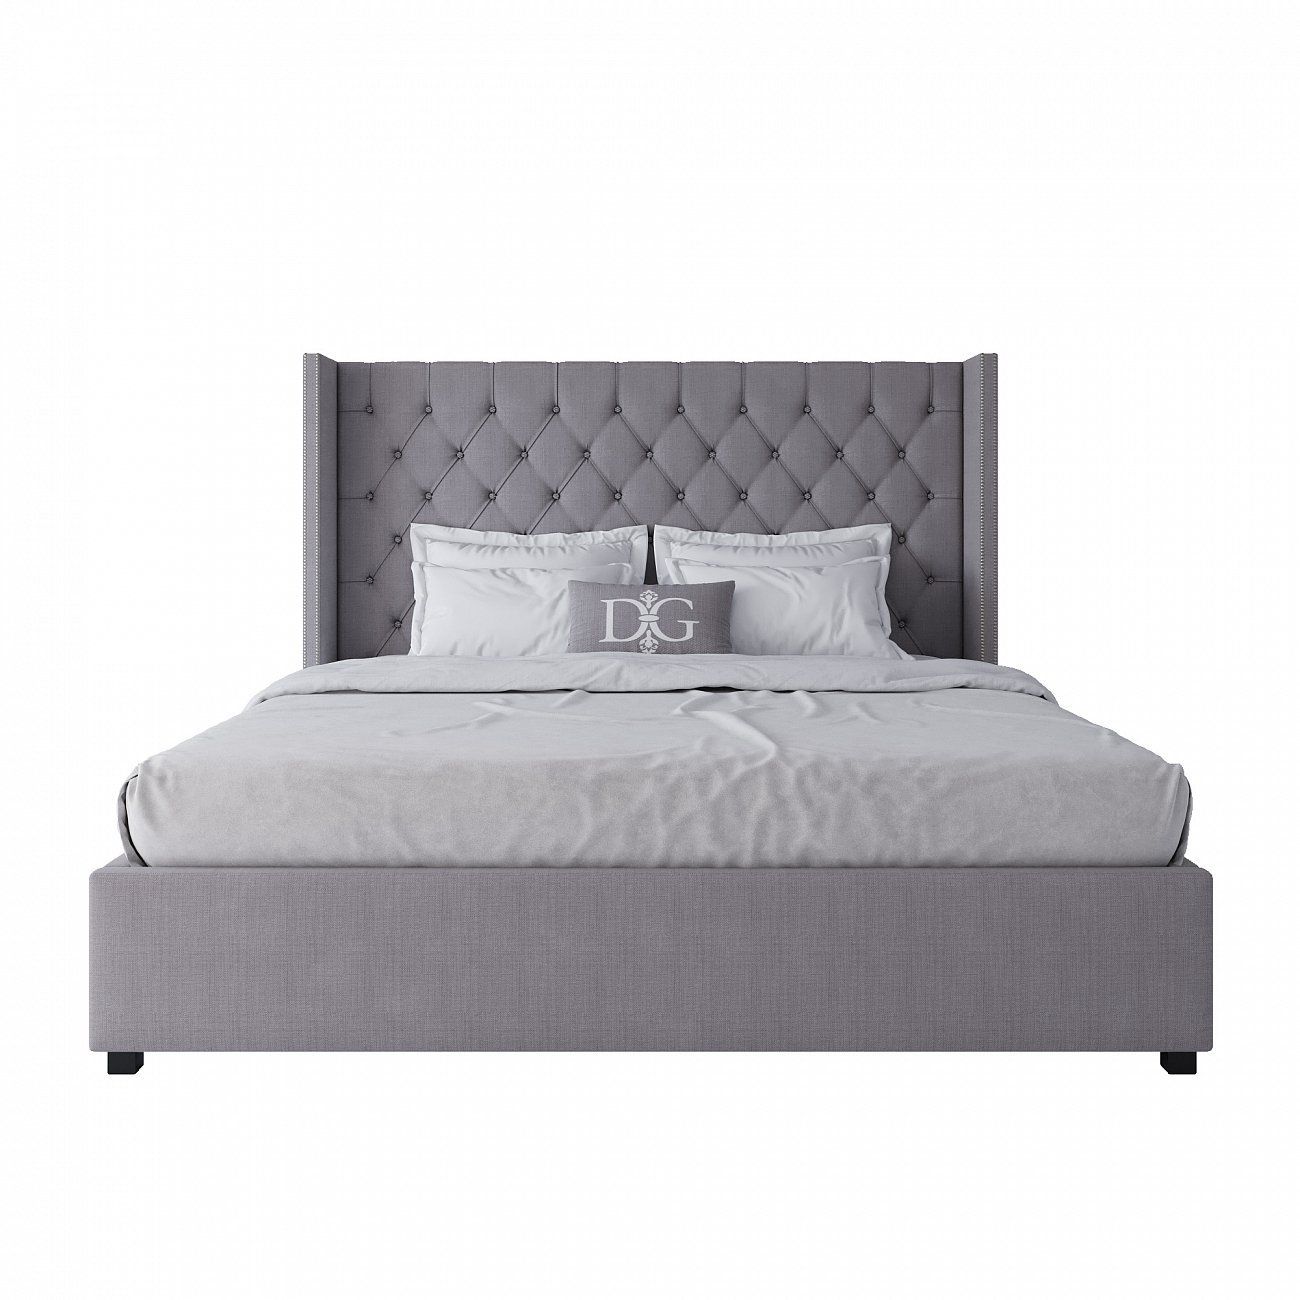 Double bed with upholstered headboard 180x200 cm grey Wing